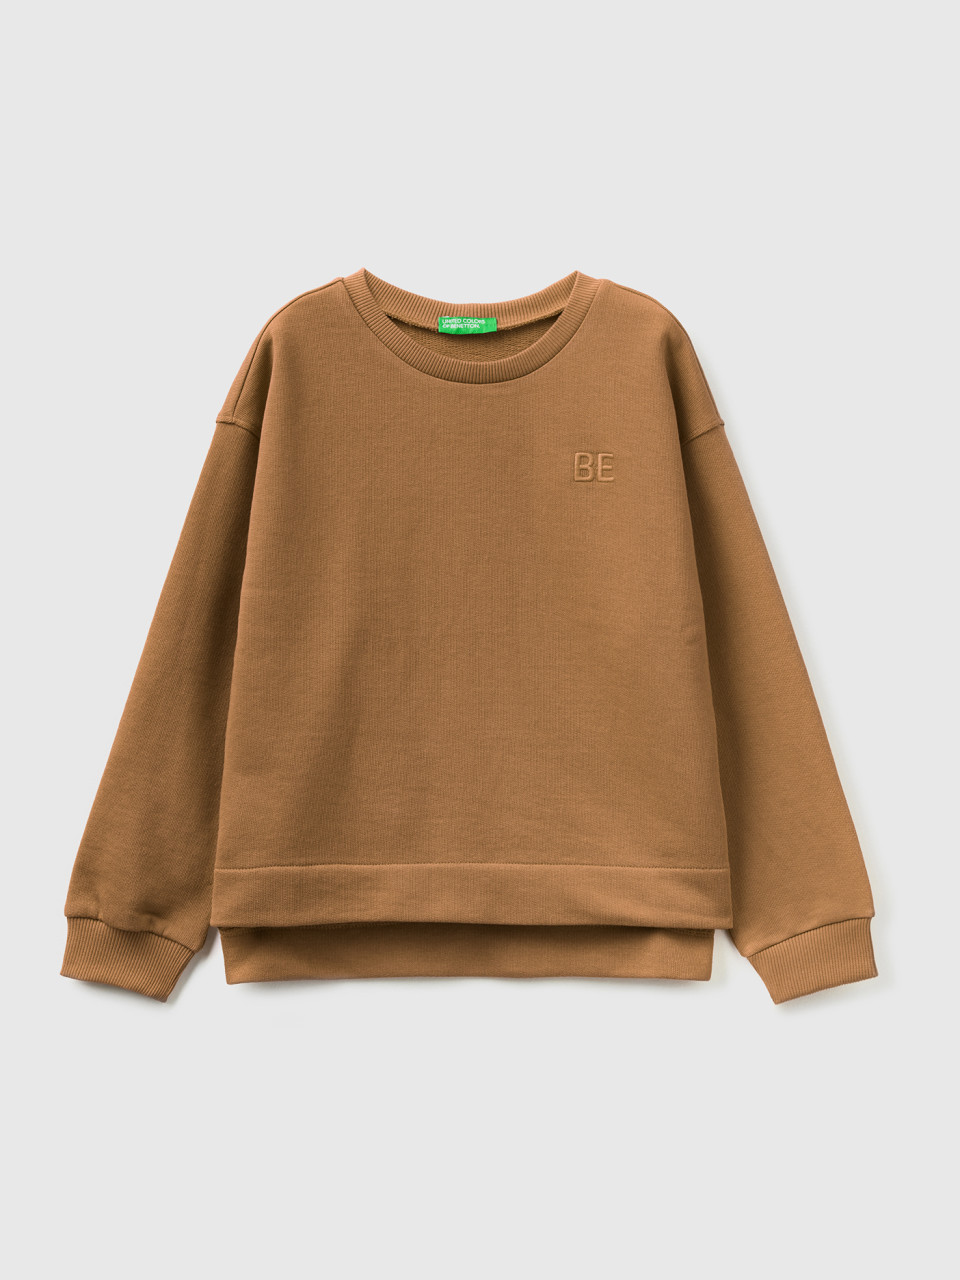 Benetton, Sweatshirt With be Embroidery, Camel, Kids